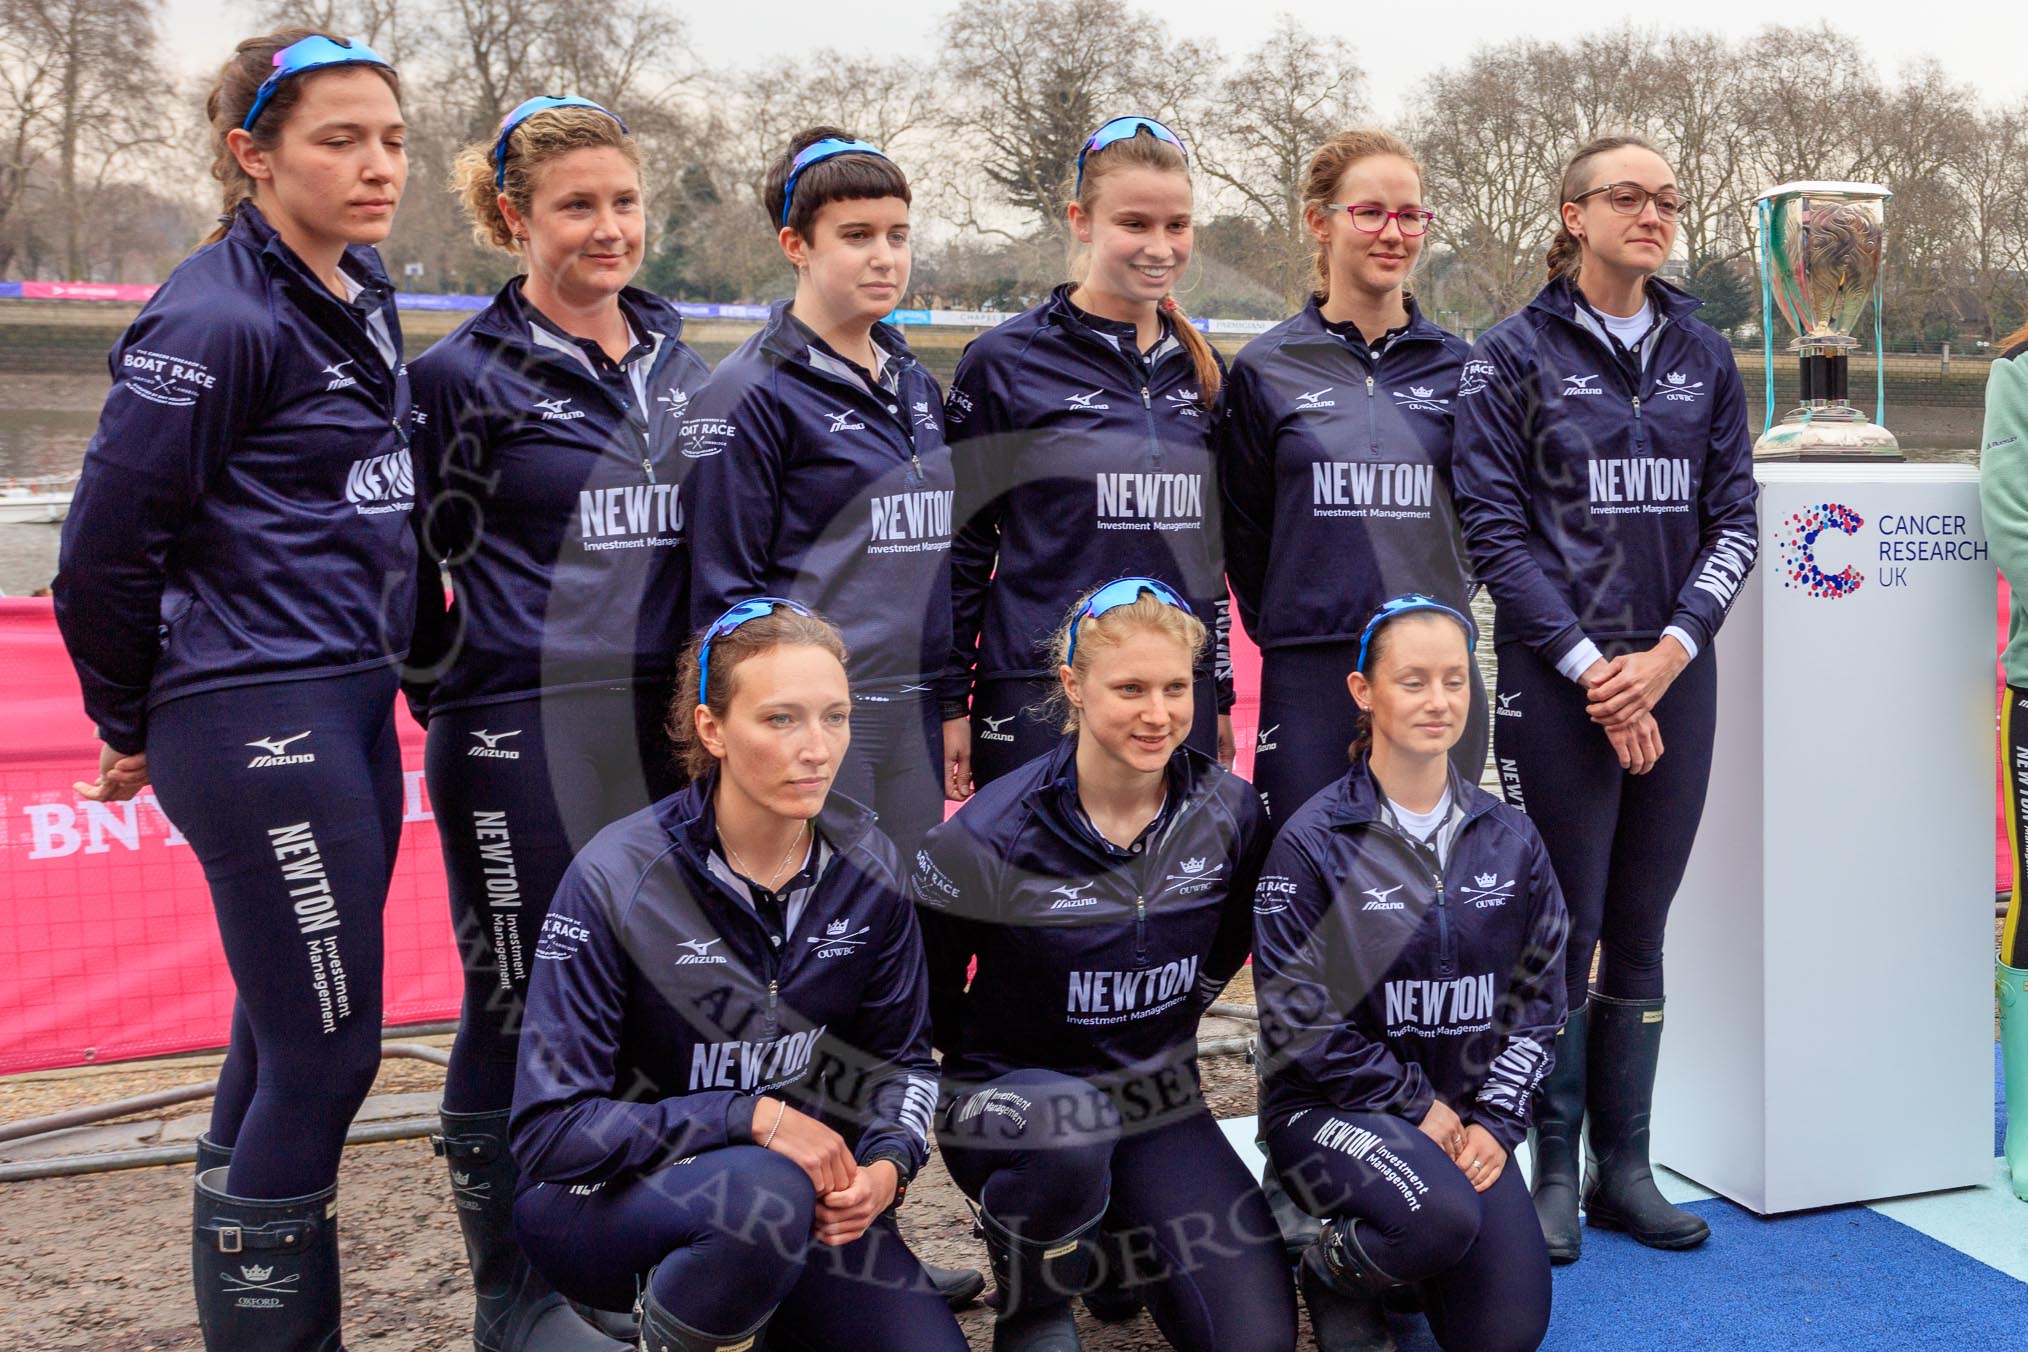 The Cancer Research UK Women's Boat Race 2018: The Oxford Blue Boat crew after the toss -  6 Sara Kushma, 5 Morgan McGovern, 4 Alice Roberts, 3 Juliette Perry, 2 - Katherine Erickson, bow Renée Koolschijn, 7 Abigail Killen, stroke Beth Bridgman, and cox Jessica Buck.
River Thames between Putney Bridge and Mortlake,
London SW15,

United Kingdom,
on 24 March 2018 at 14:42, image #53